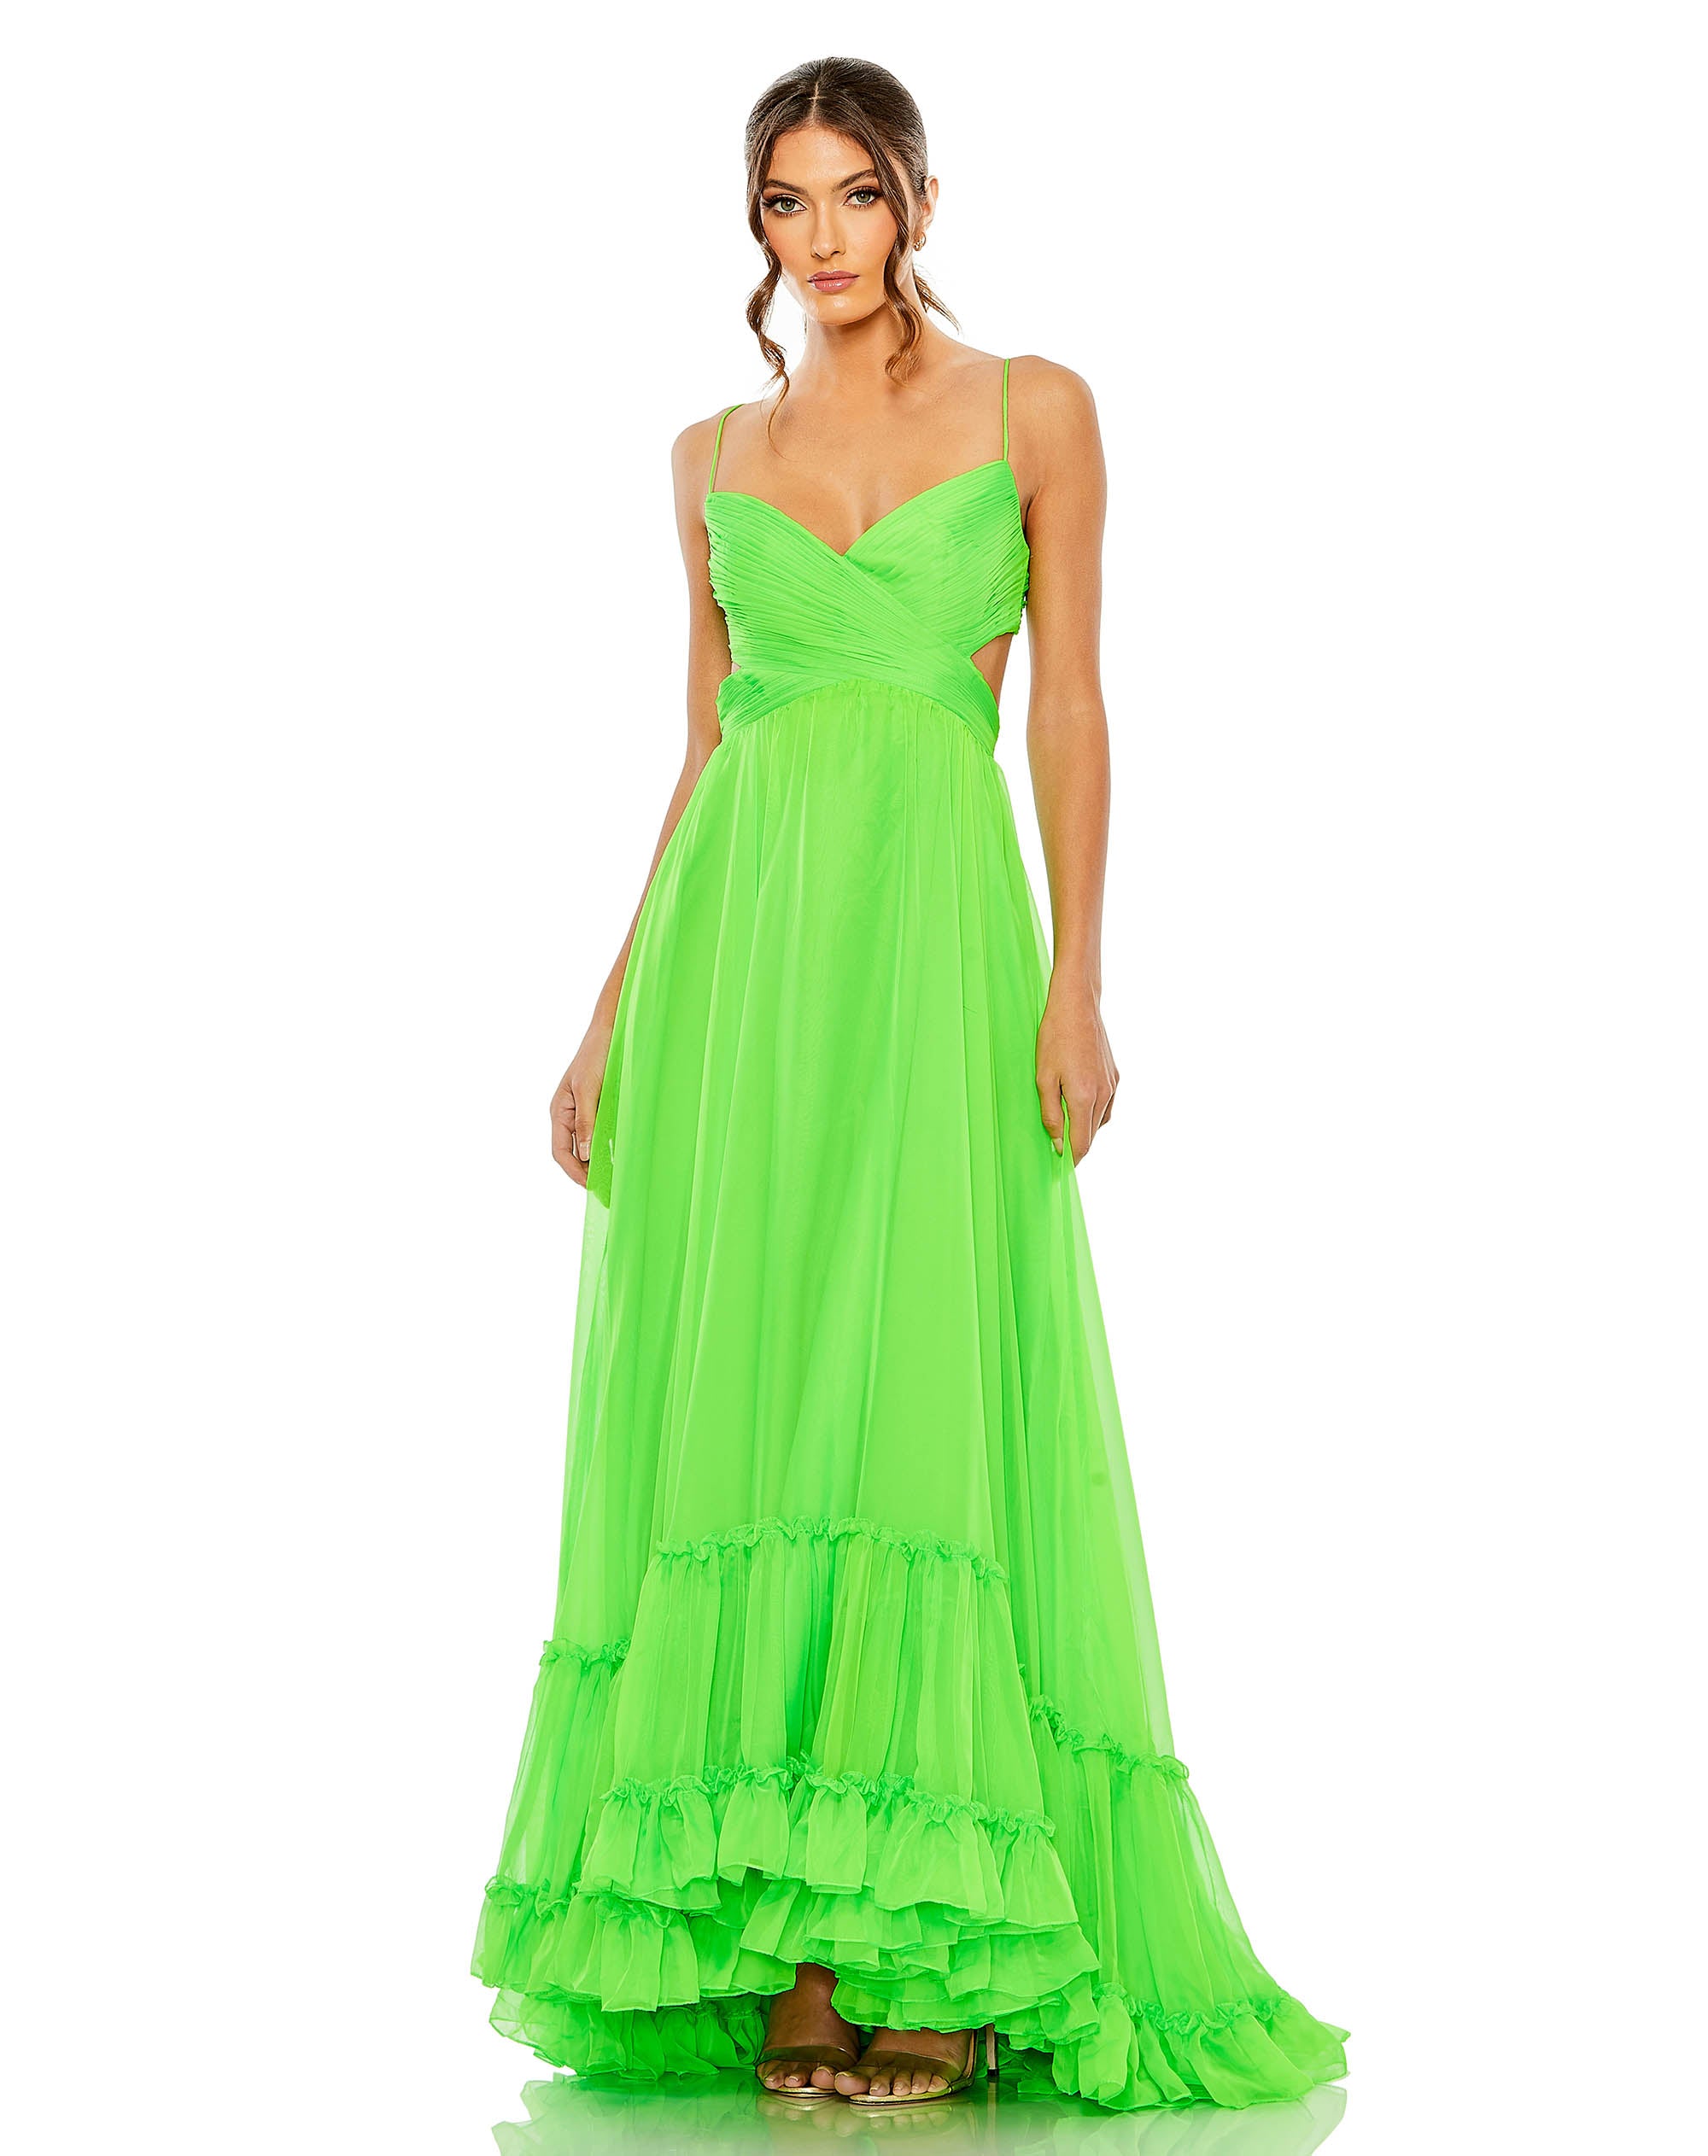 Ruched Tiered Spaghetti Strap Gown